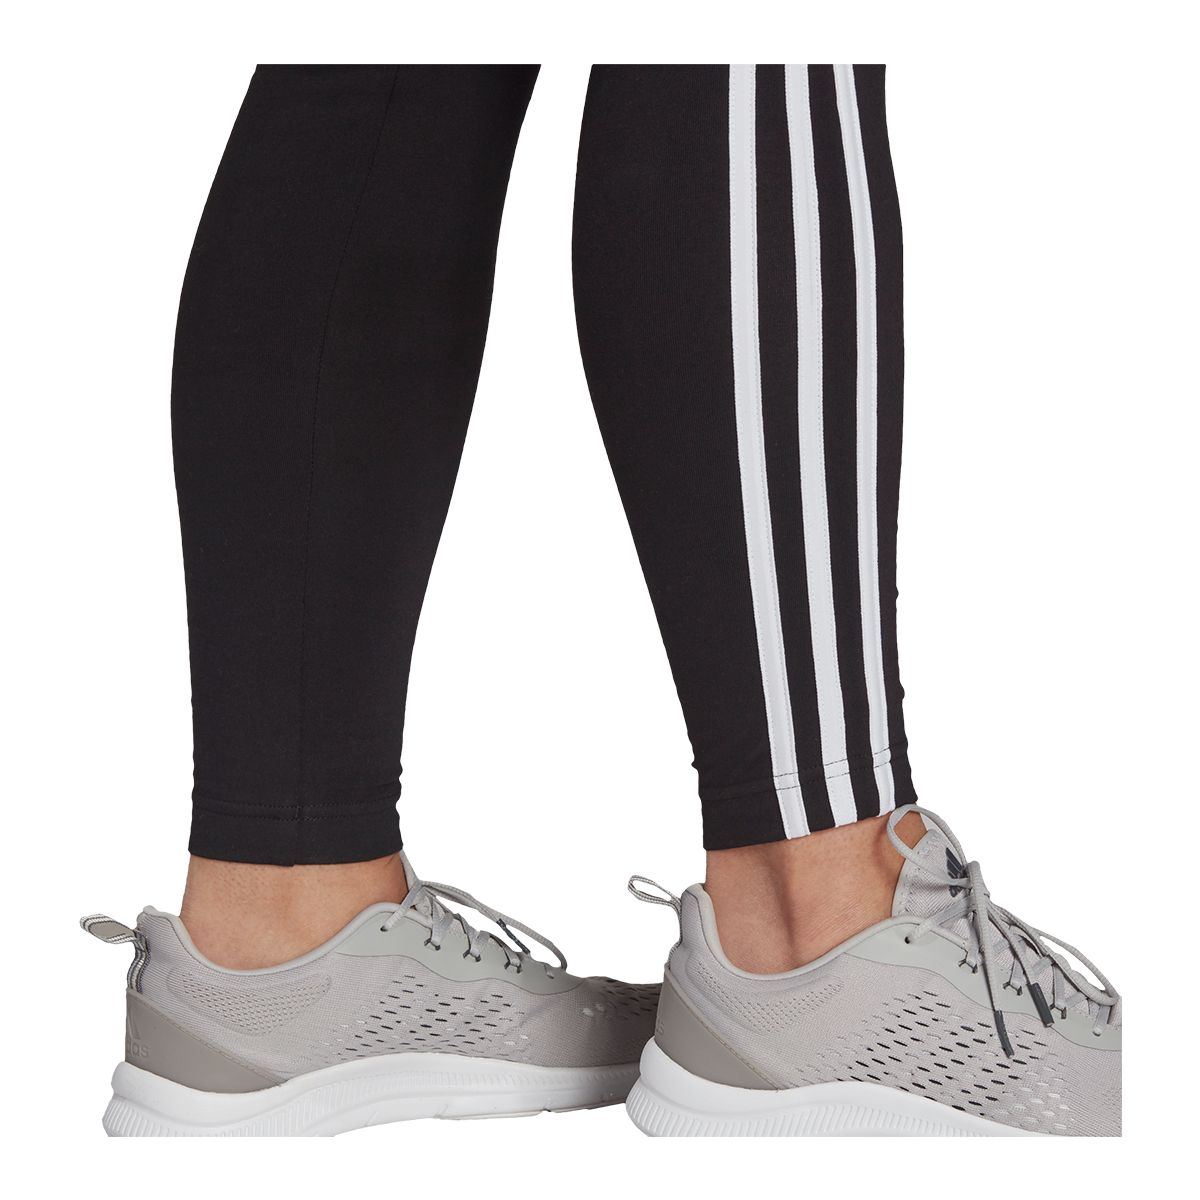 Adidas adidas 3-Stripes Mesh Tights (leggings only) Size 8, 10, 12